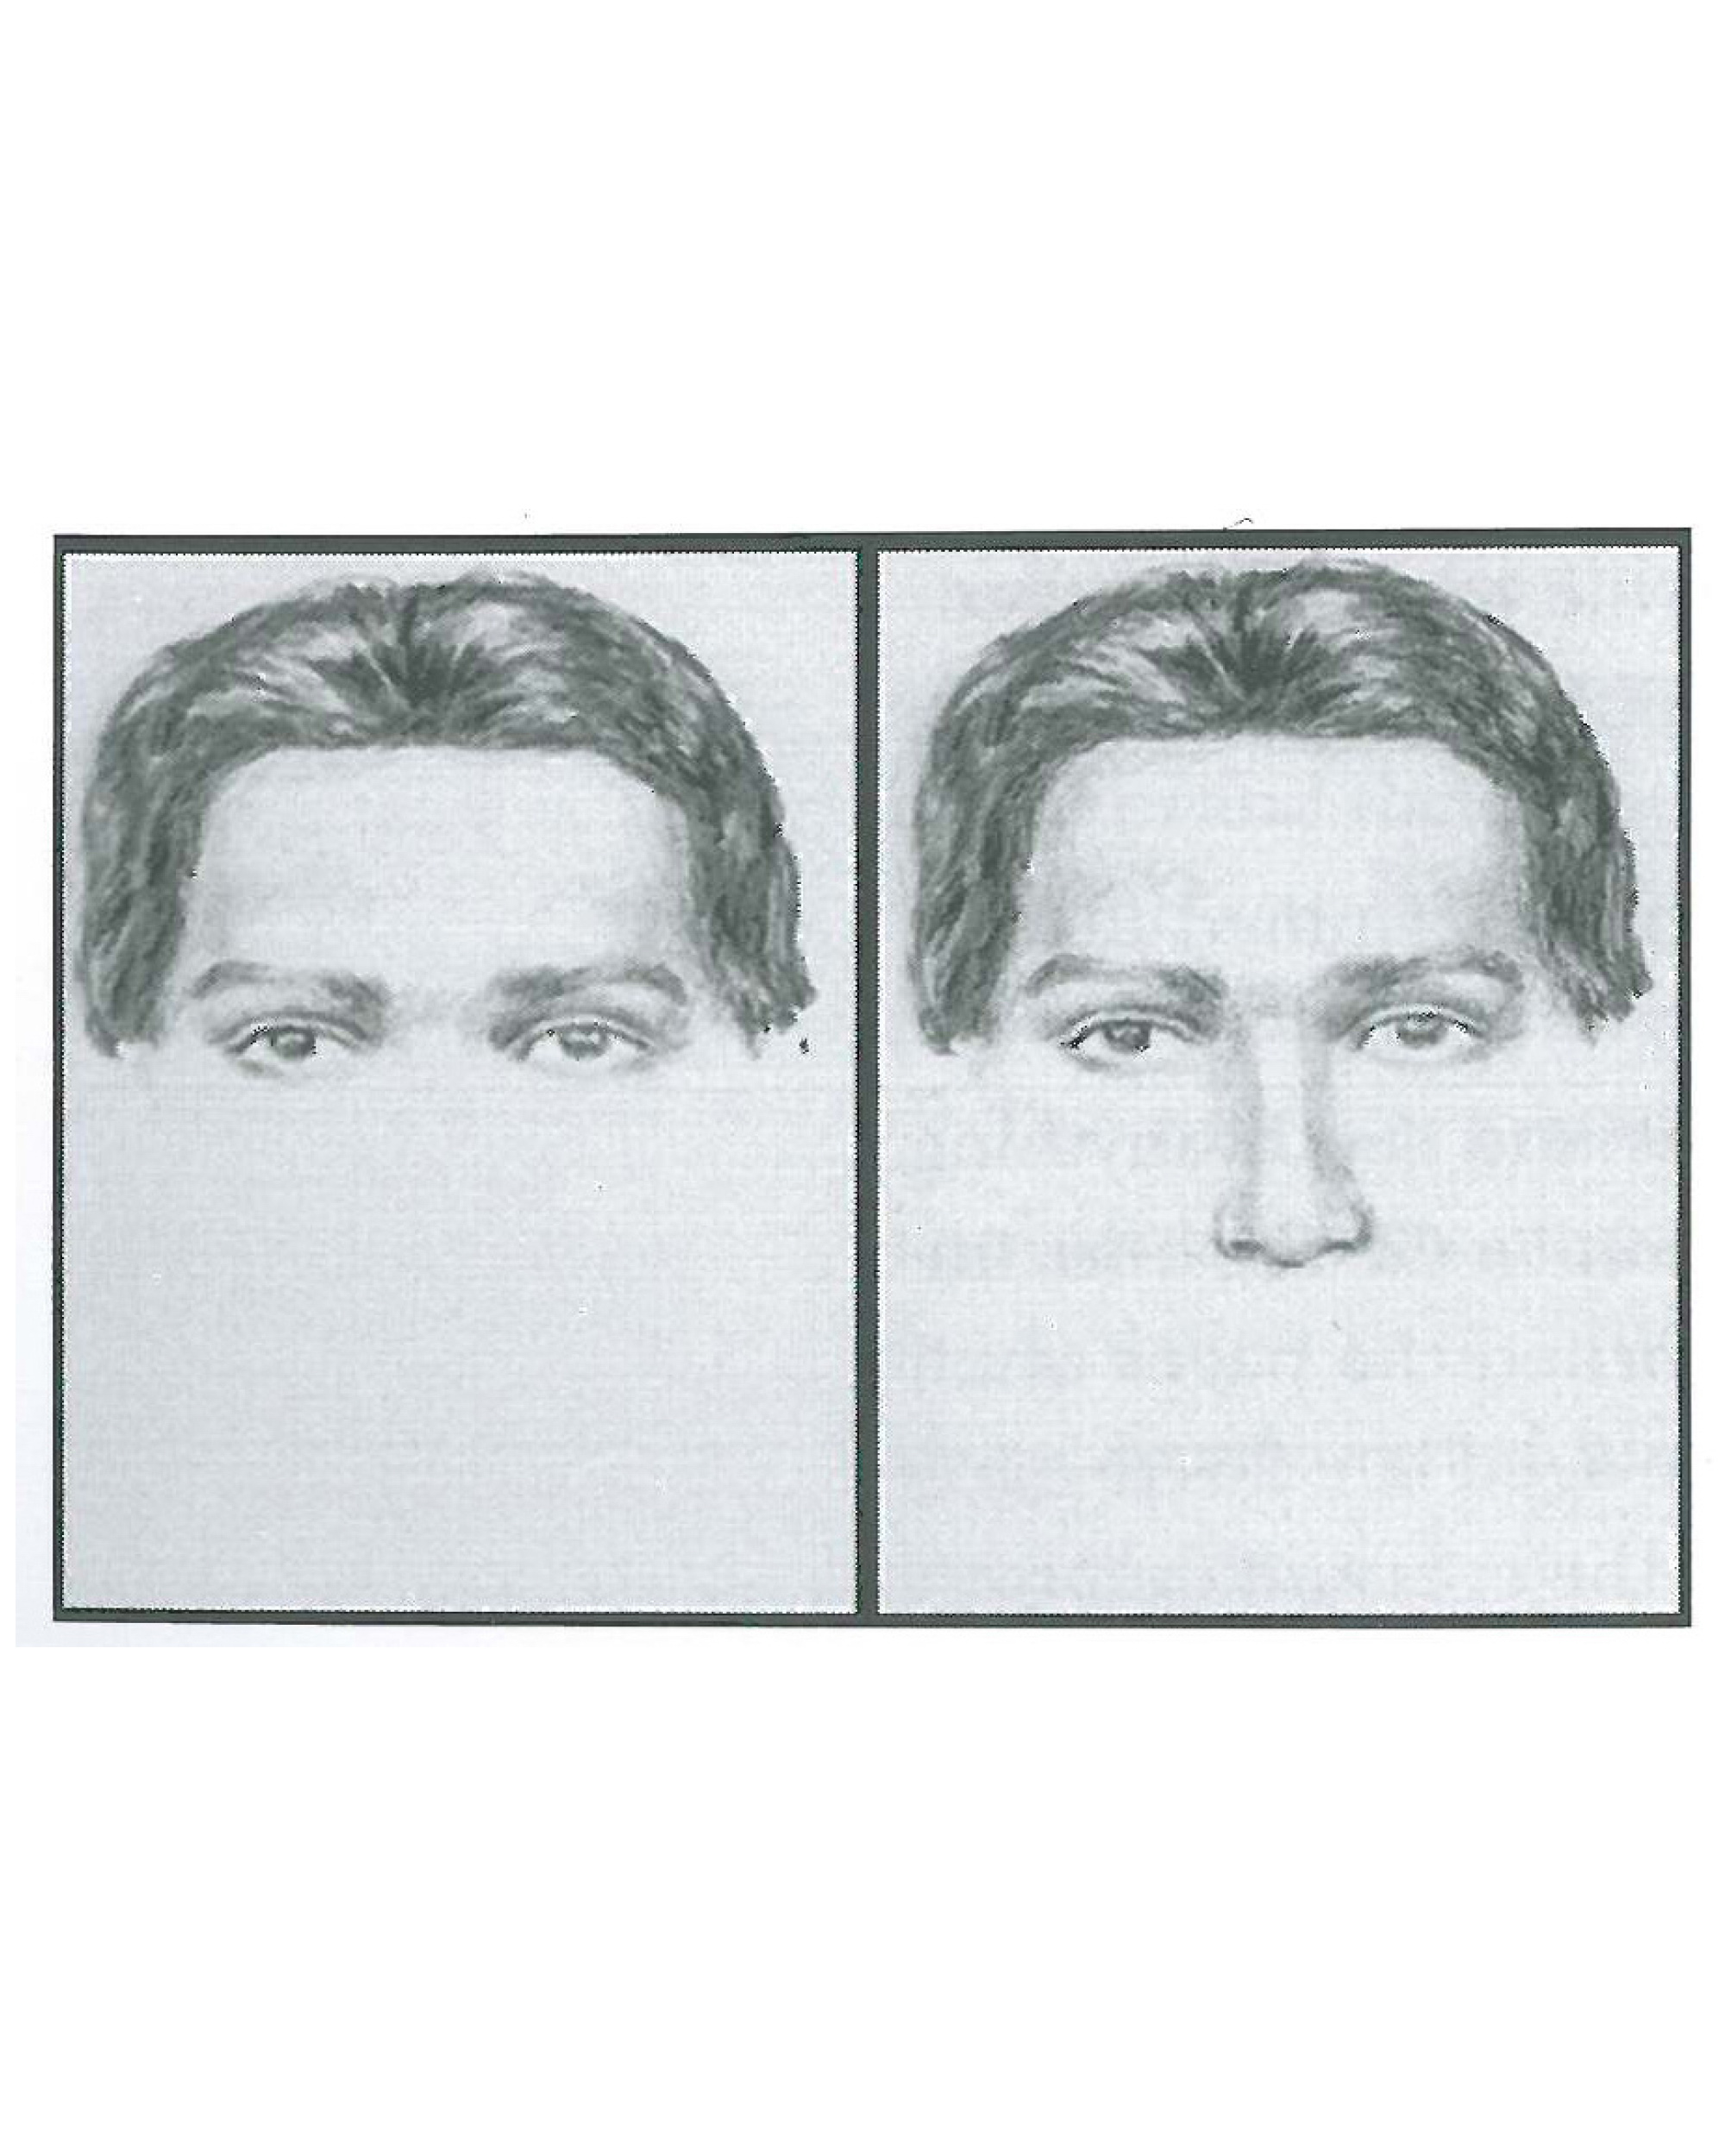 A sketch progression using the FBI Facial Identification Catalog. Image courtesy of Lois Gibson.